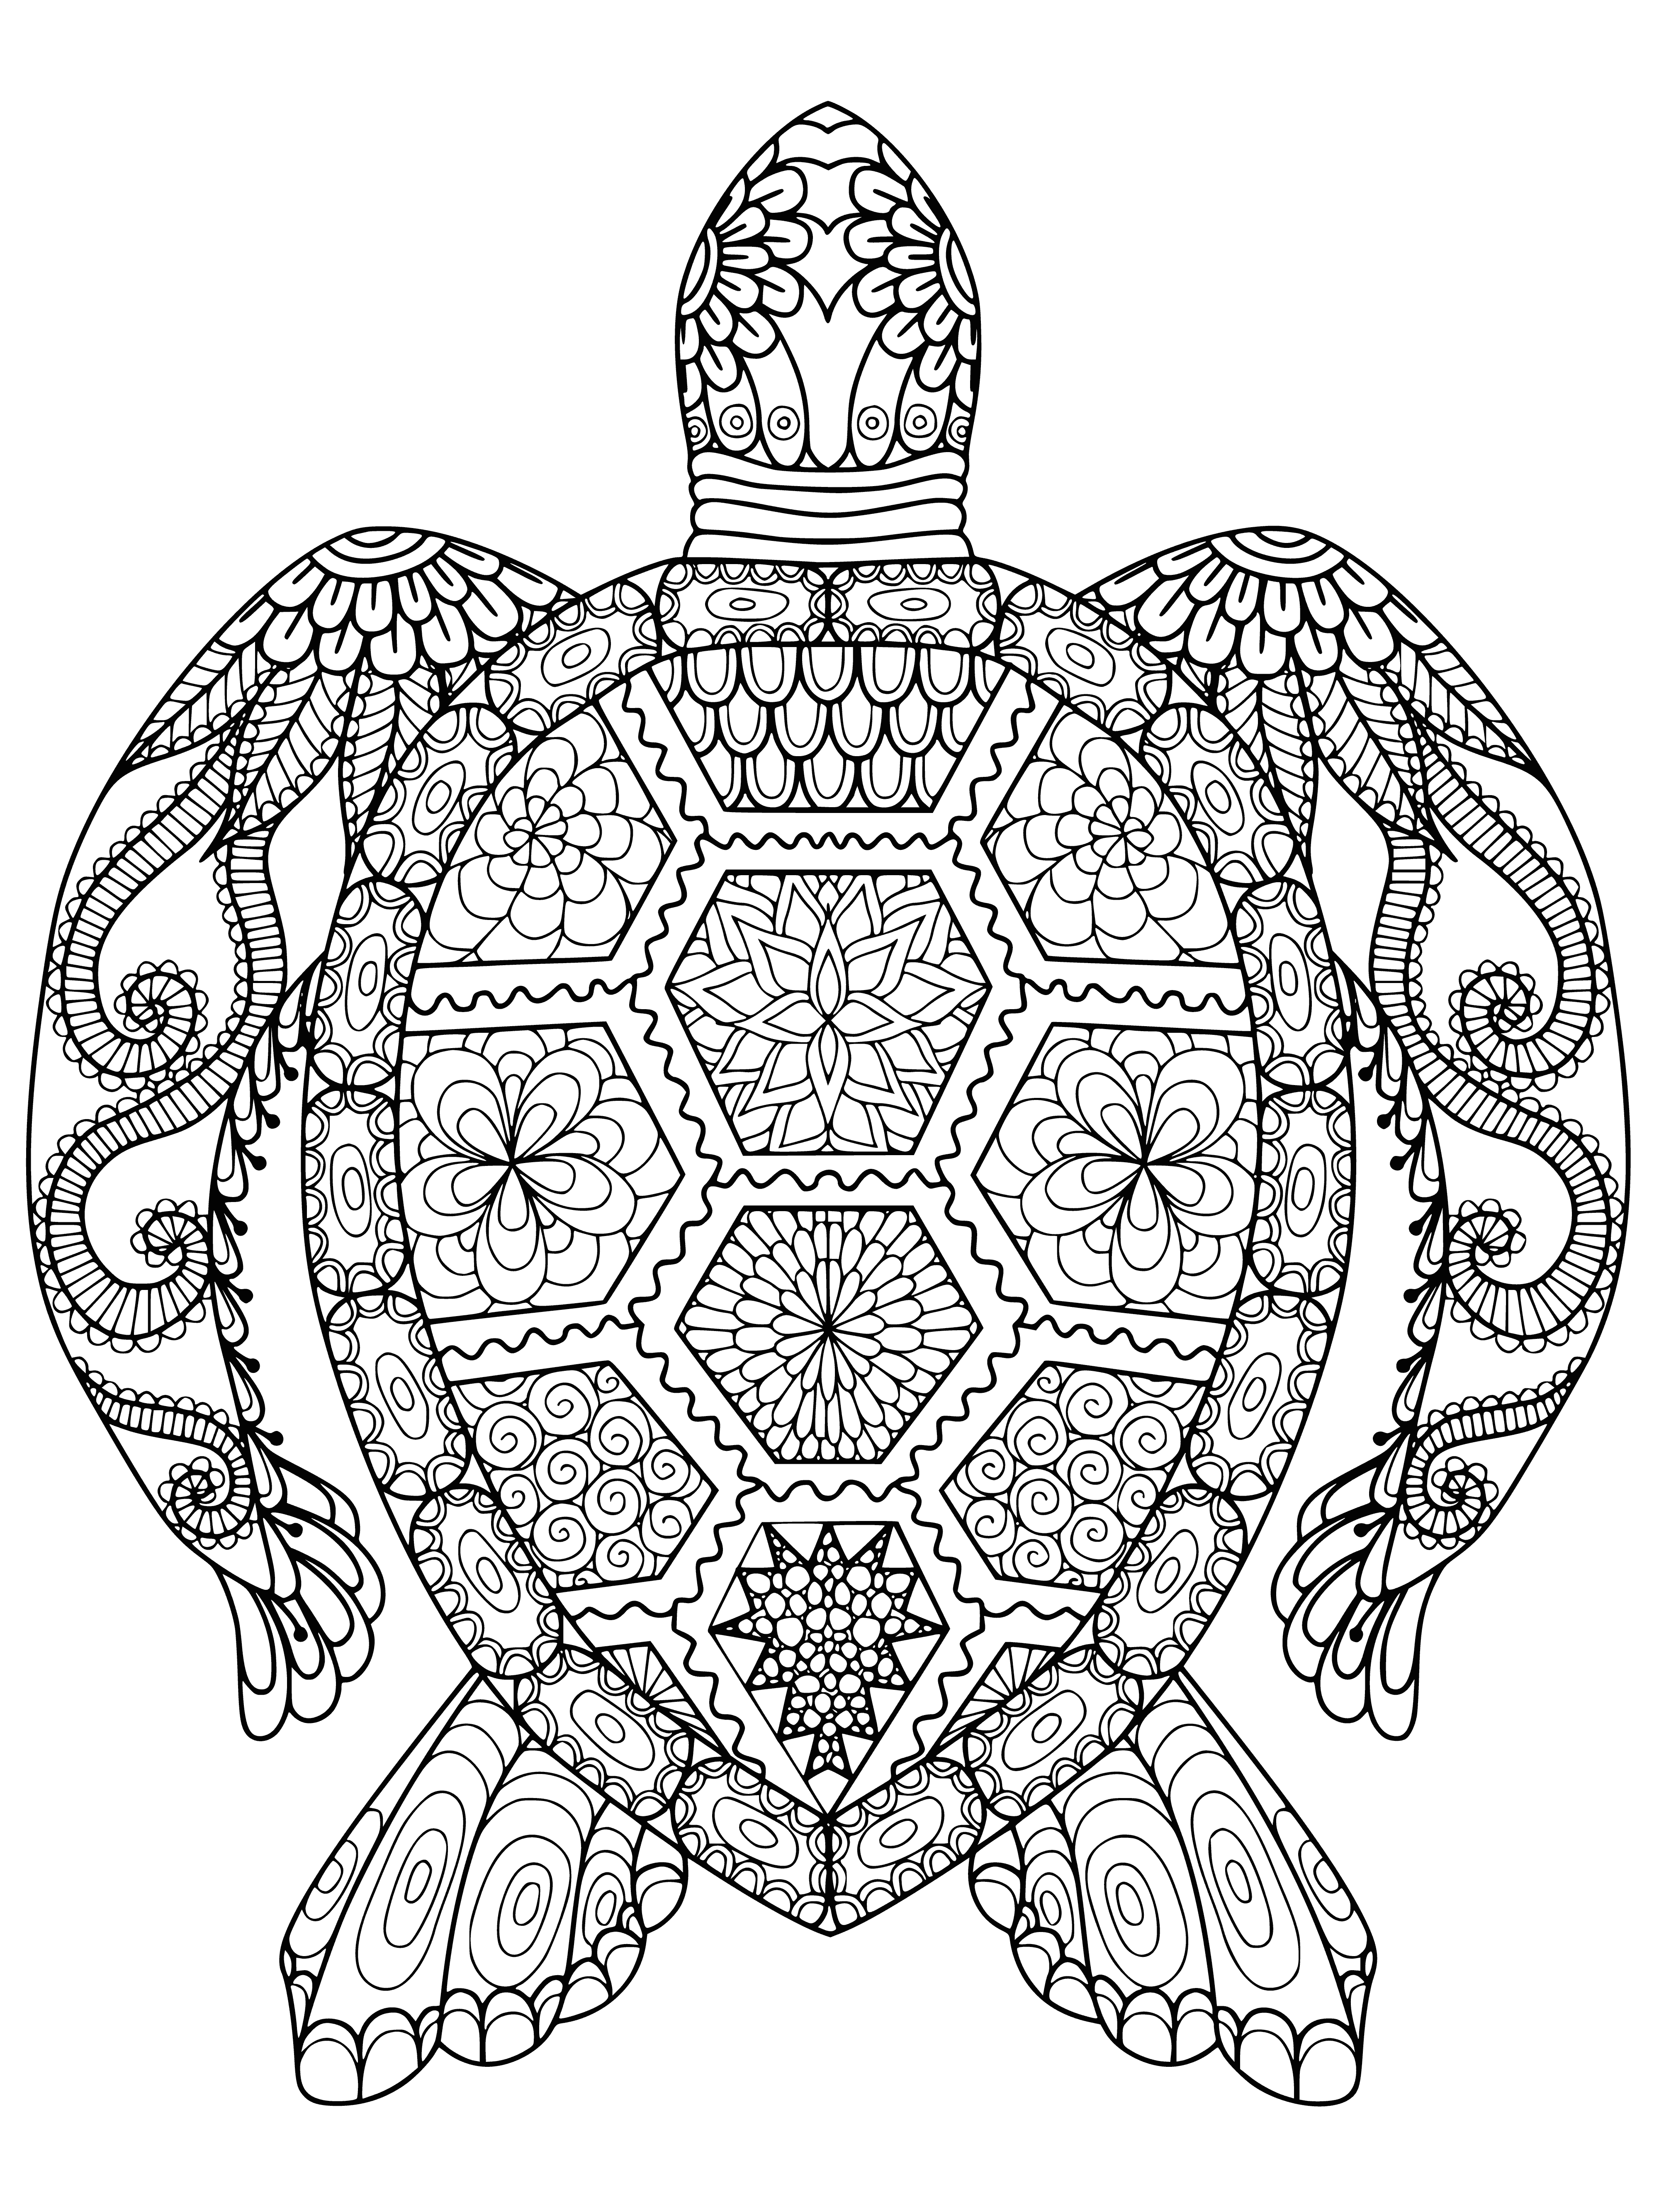 coloring page: Turtle swimming in ocean surrounded by colorful fish & coral - soothing Adult Coloring antistress Sea - Sea Turtle.